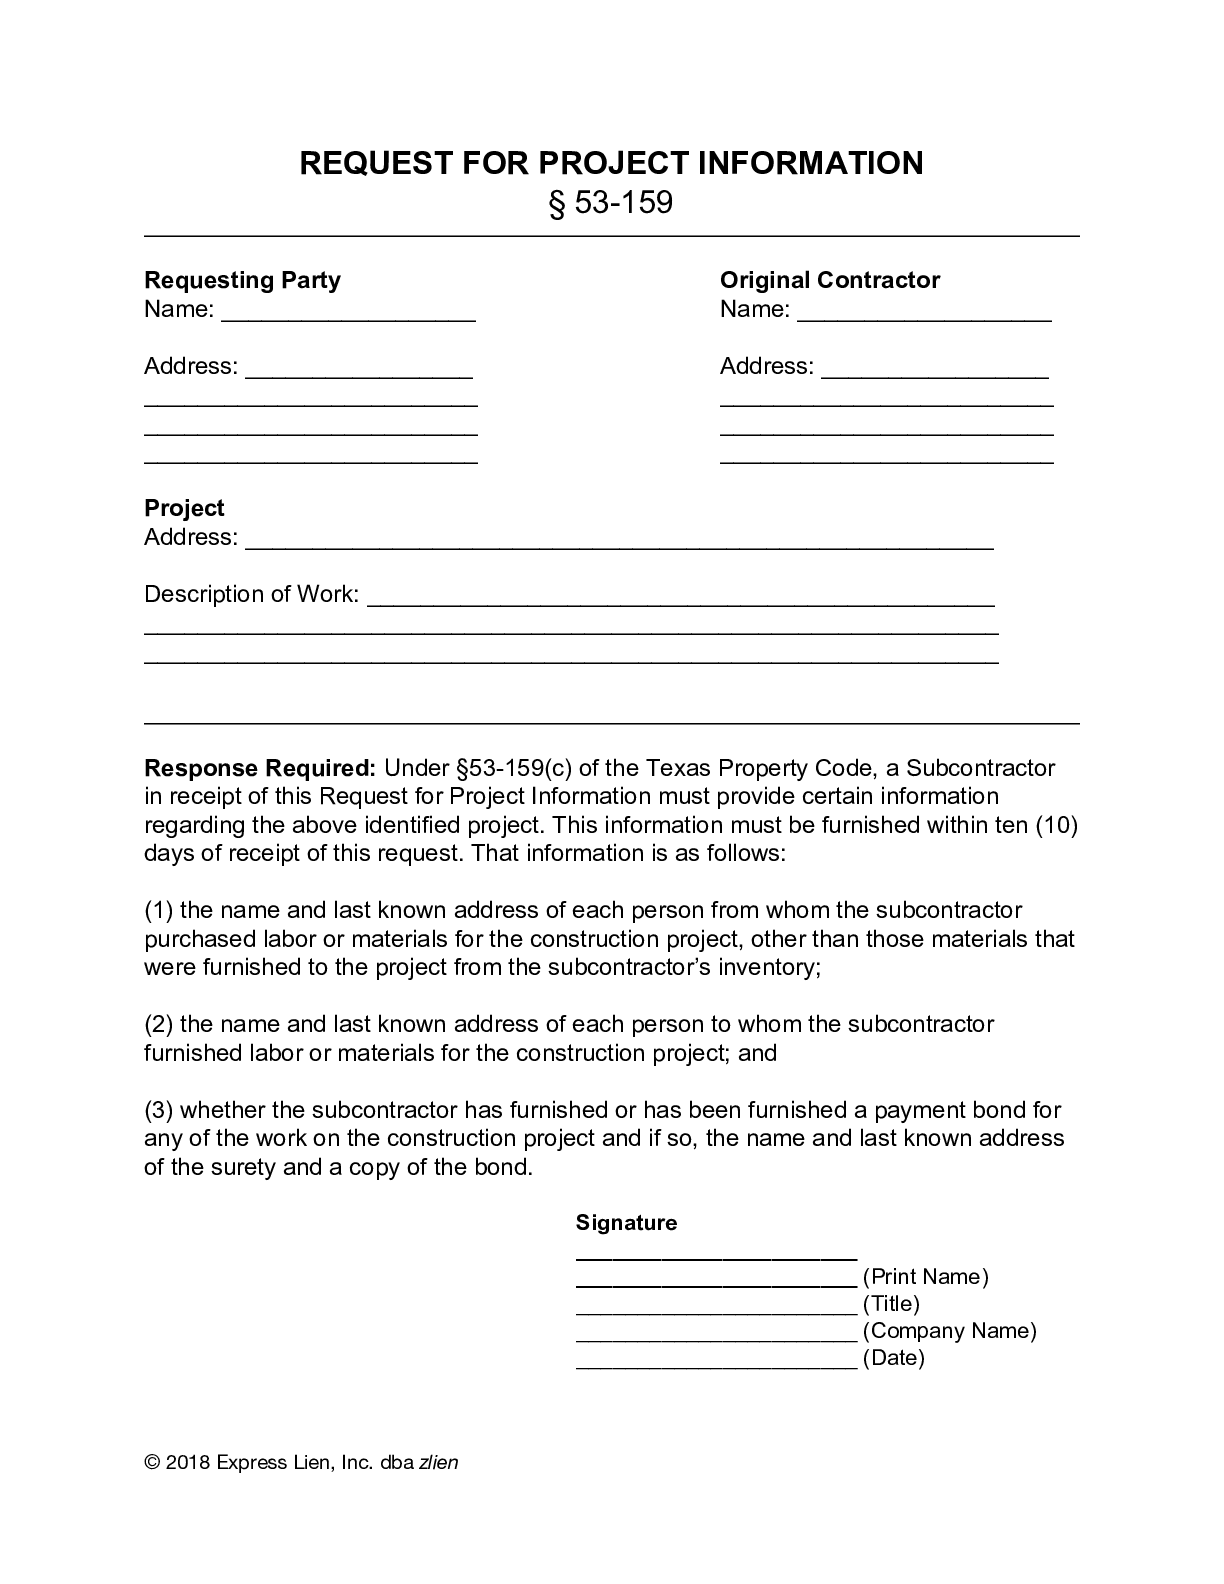 Texas Request for Project Information Form